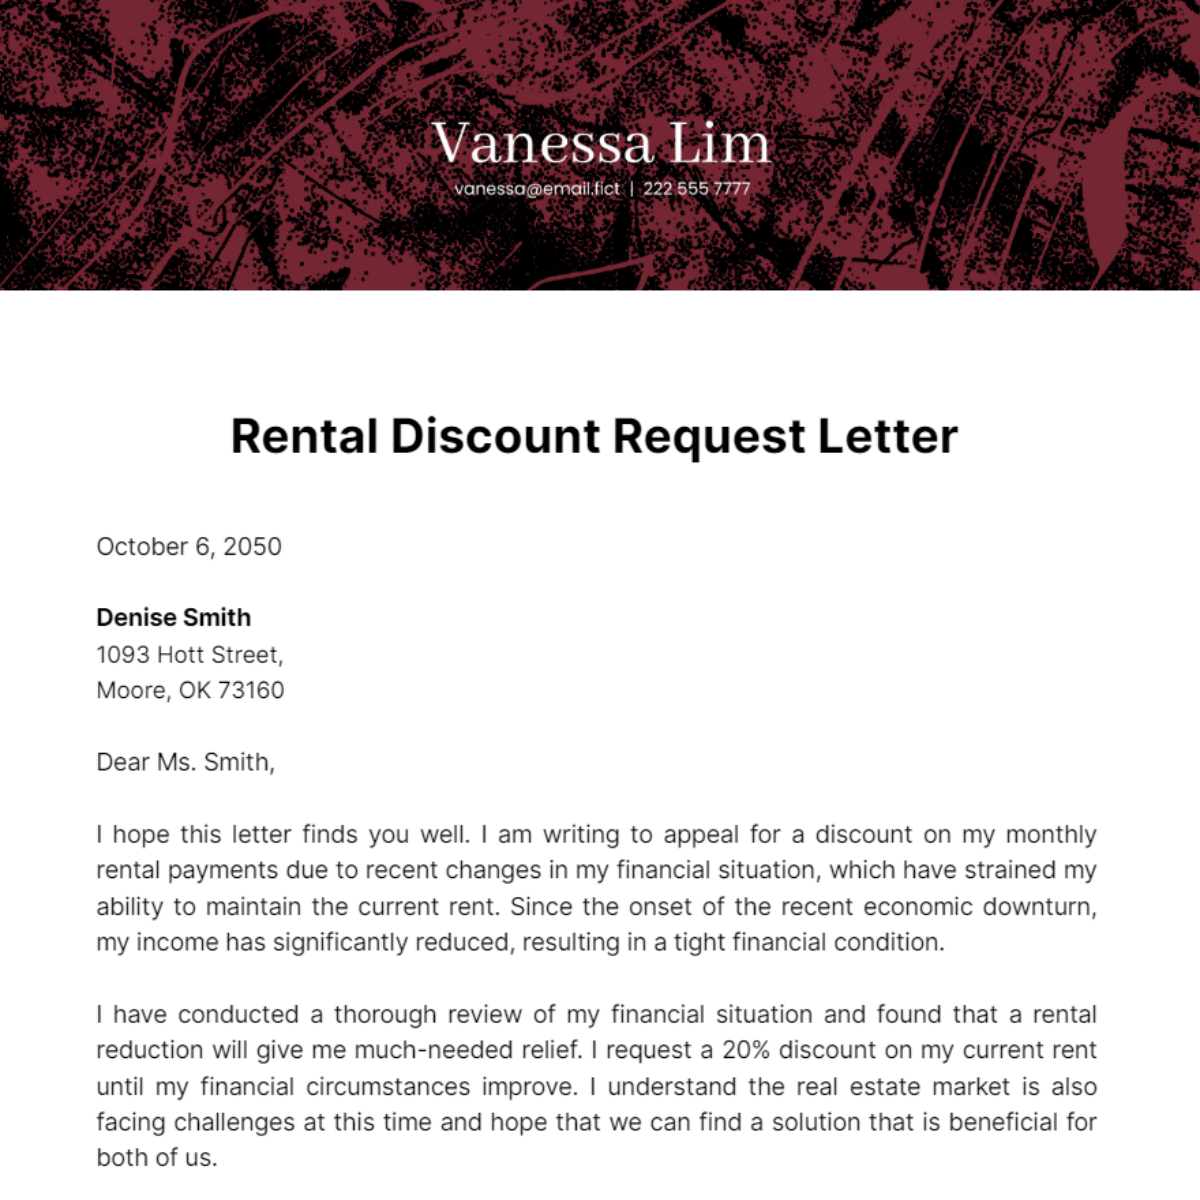 Rental Discount Request Letter Template